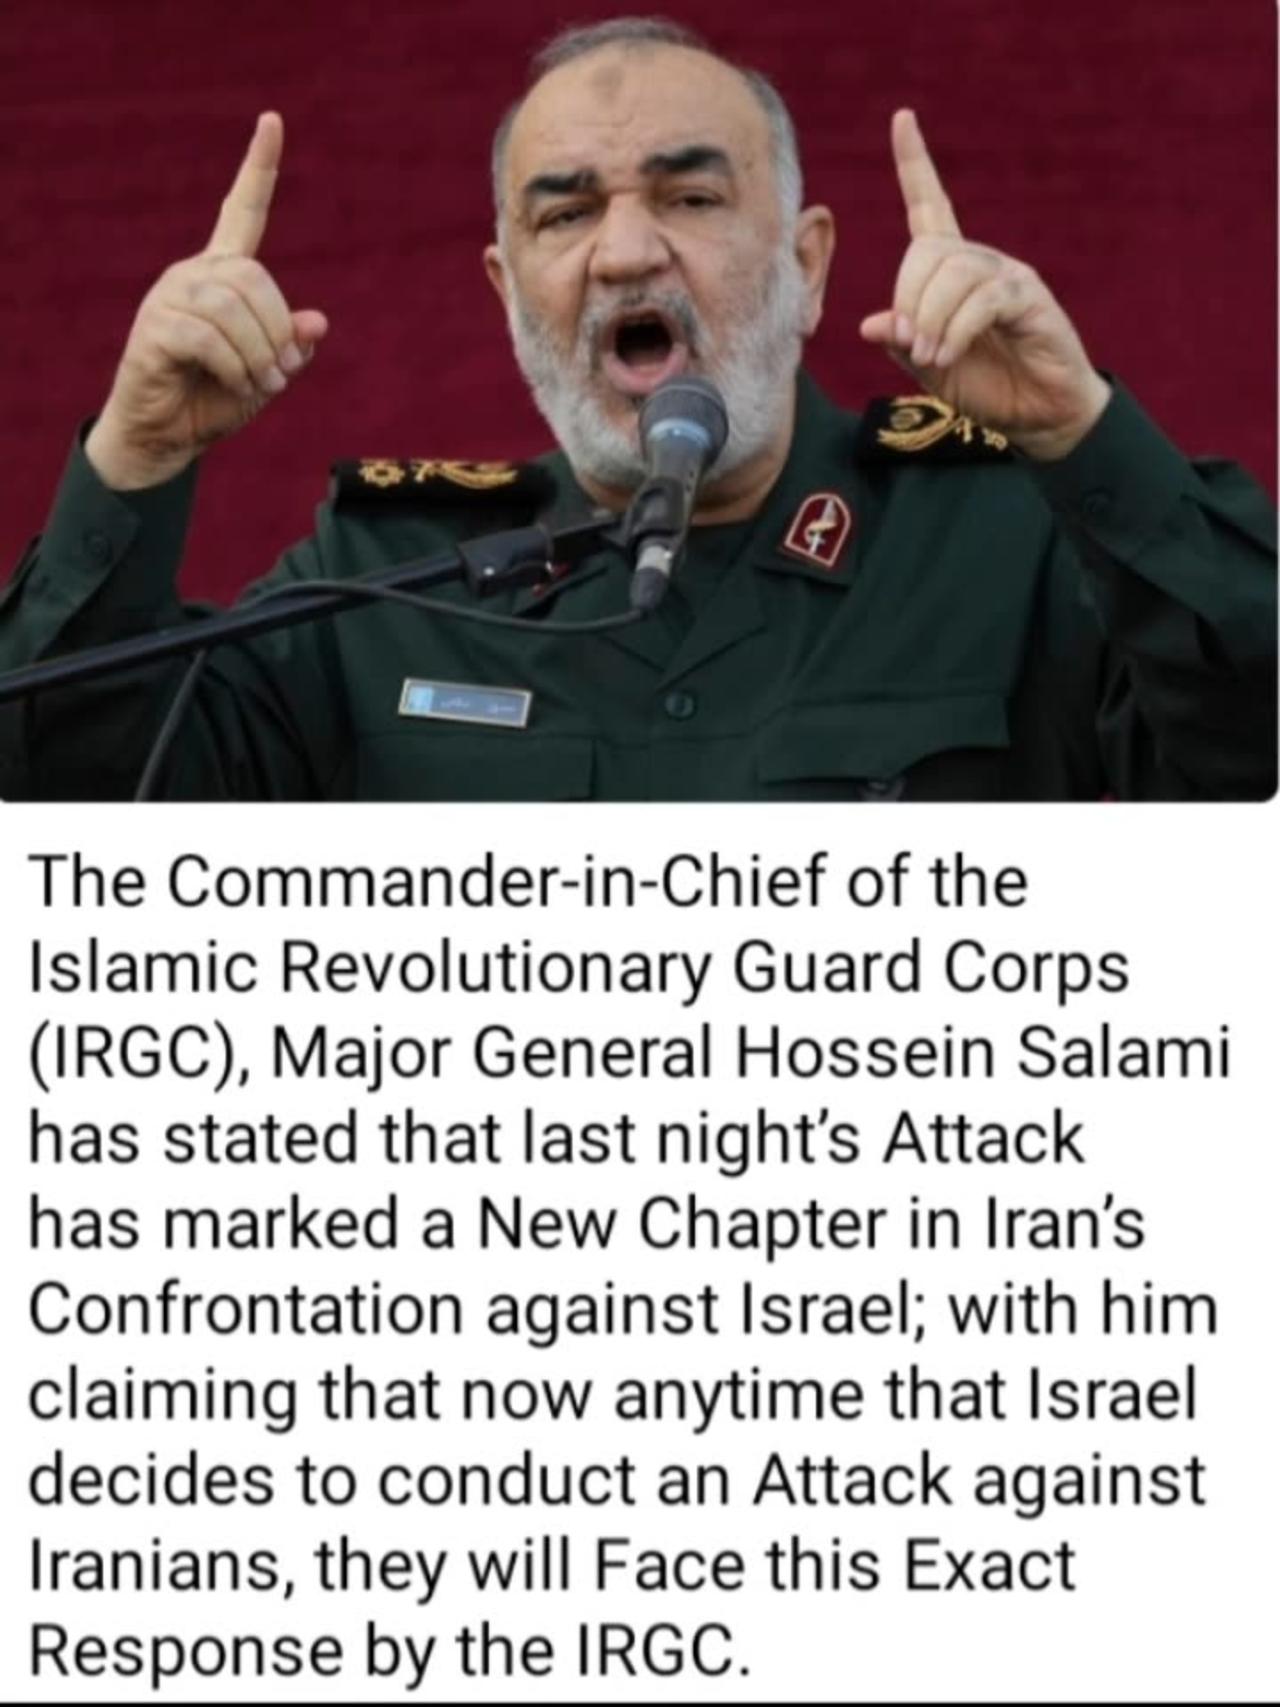 The Commander-in-Chief of the Islamic Revolutionary Guard Corps (IRGC)...